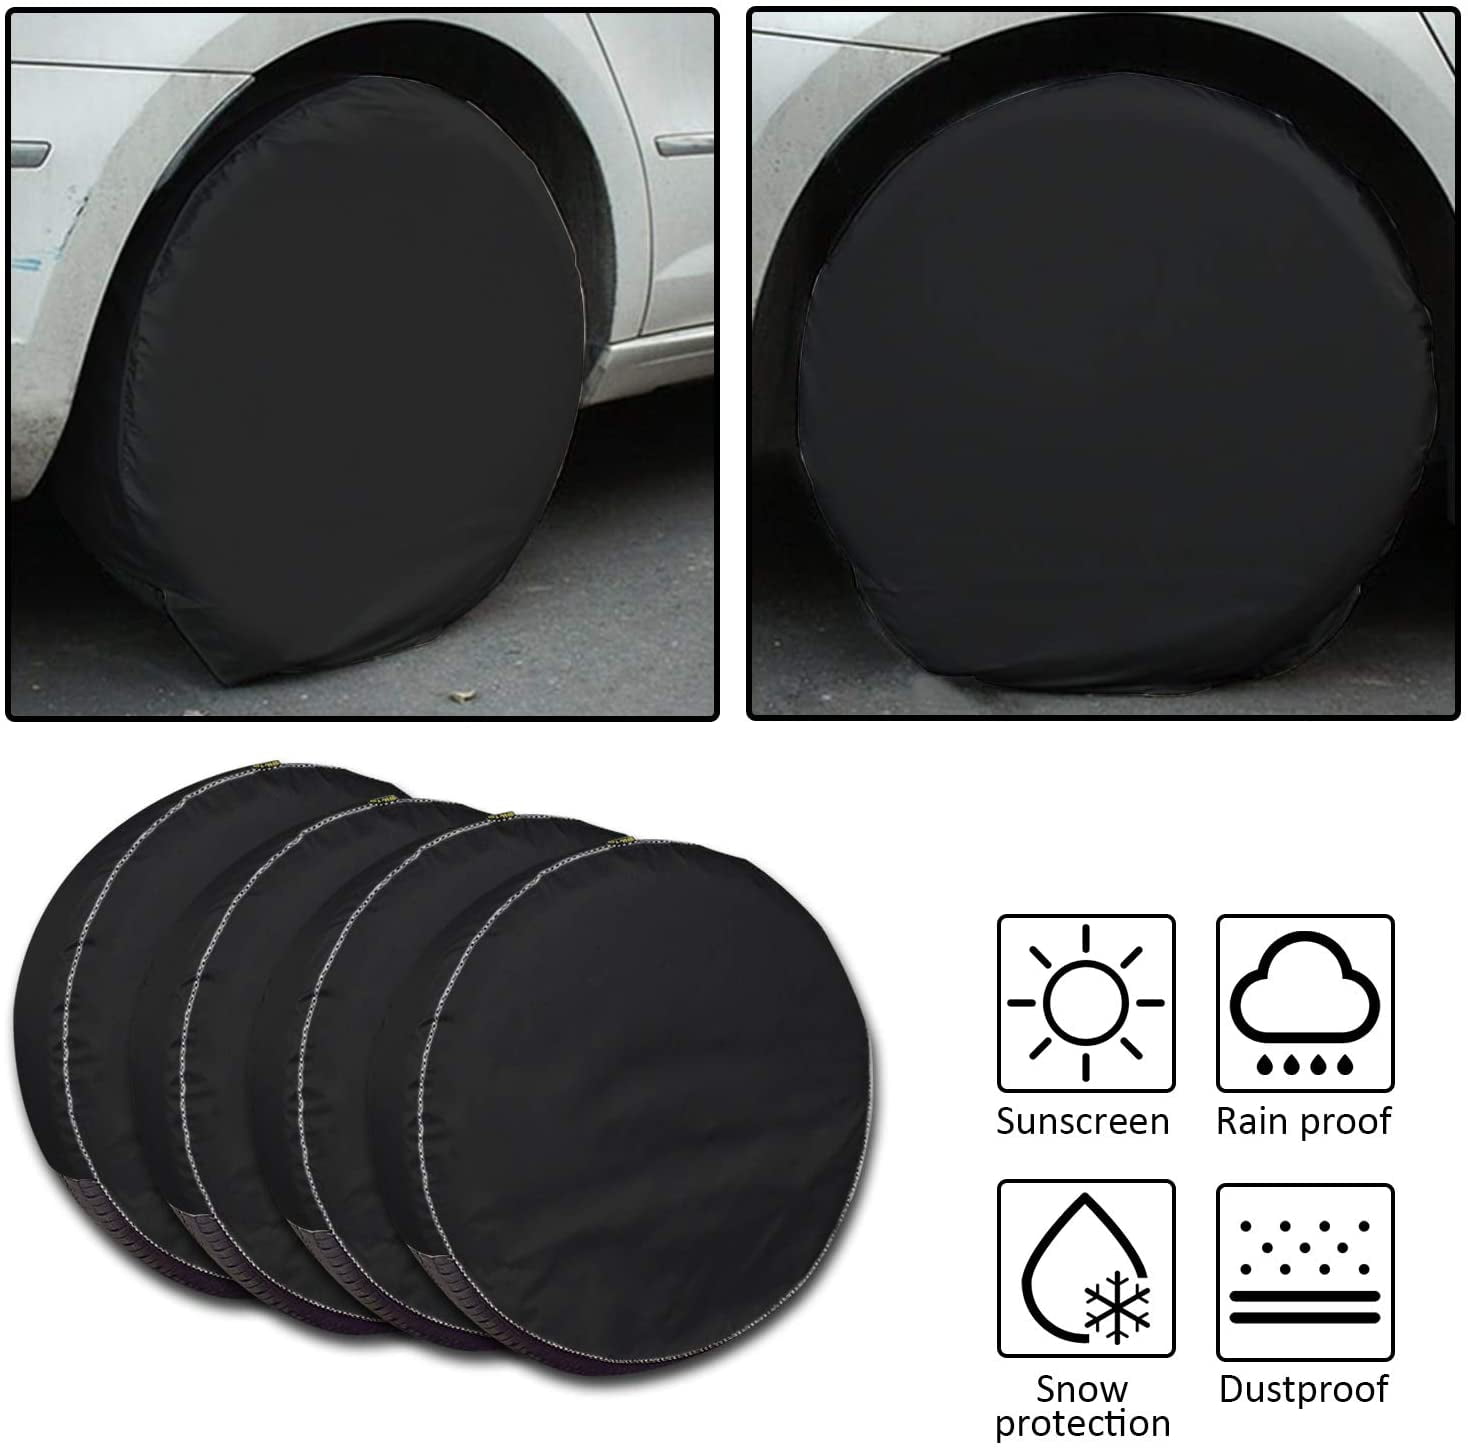 Fits 30 to 32,Black Tire Covers 4 Pack,Set of 4 Wheel Tire Covers for RV Auto Truck Car Camper Trailer,Waterproof Sun-Proof Weatherproof Tire Protectors